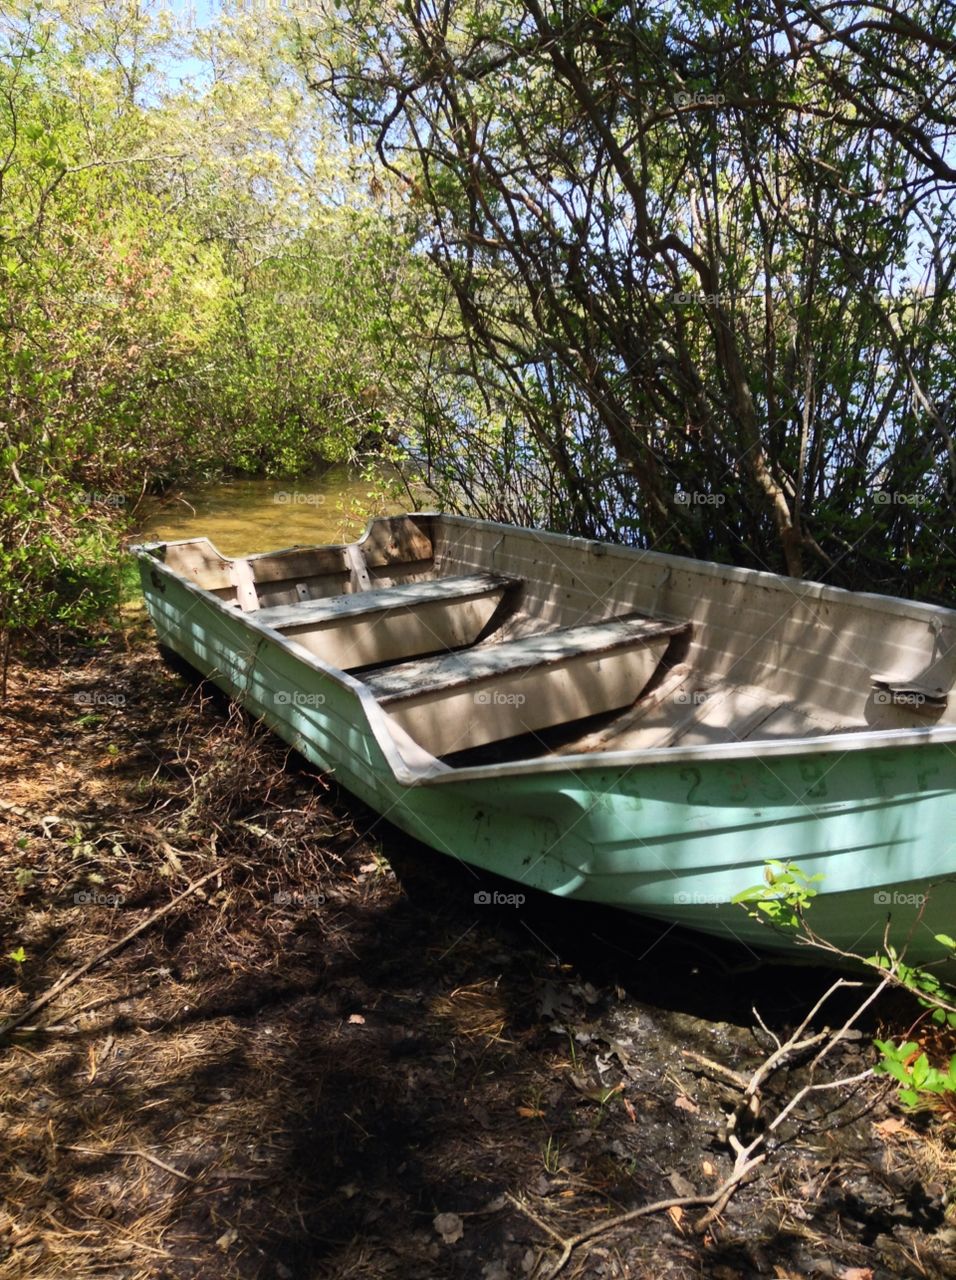 Abandoned boat at the pond. Dented and well loved boat left hidden at the edge of a pond